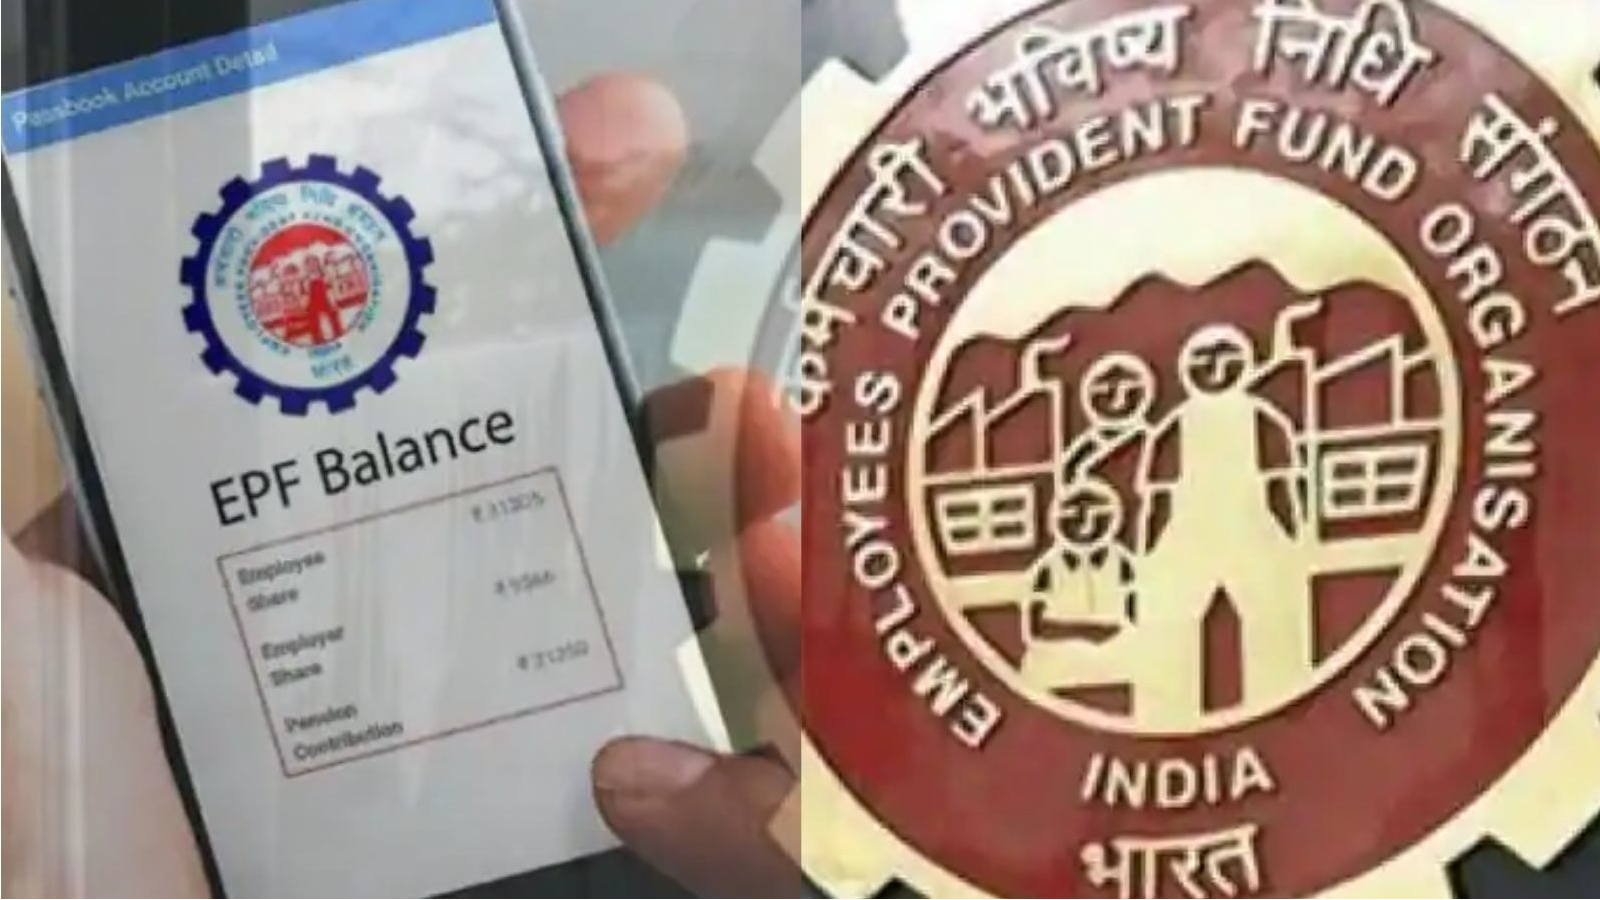 EPFO Balance Check New Service: Now you can easily check EPF balance  without login, know the complete method here - Rightsofemployees.com